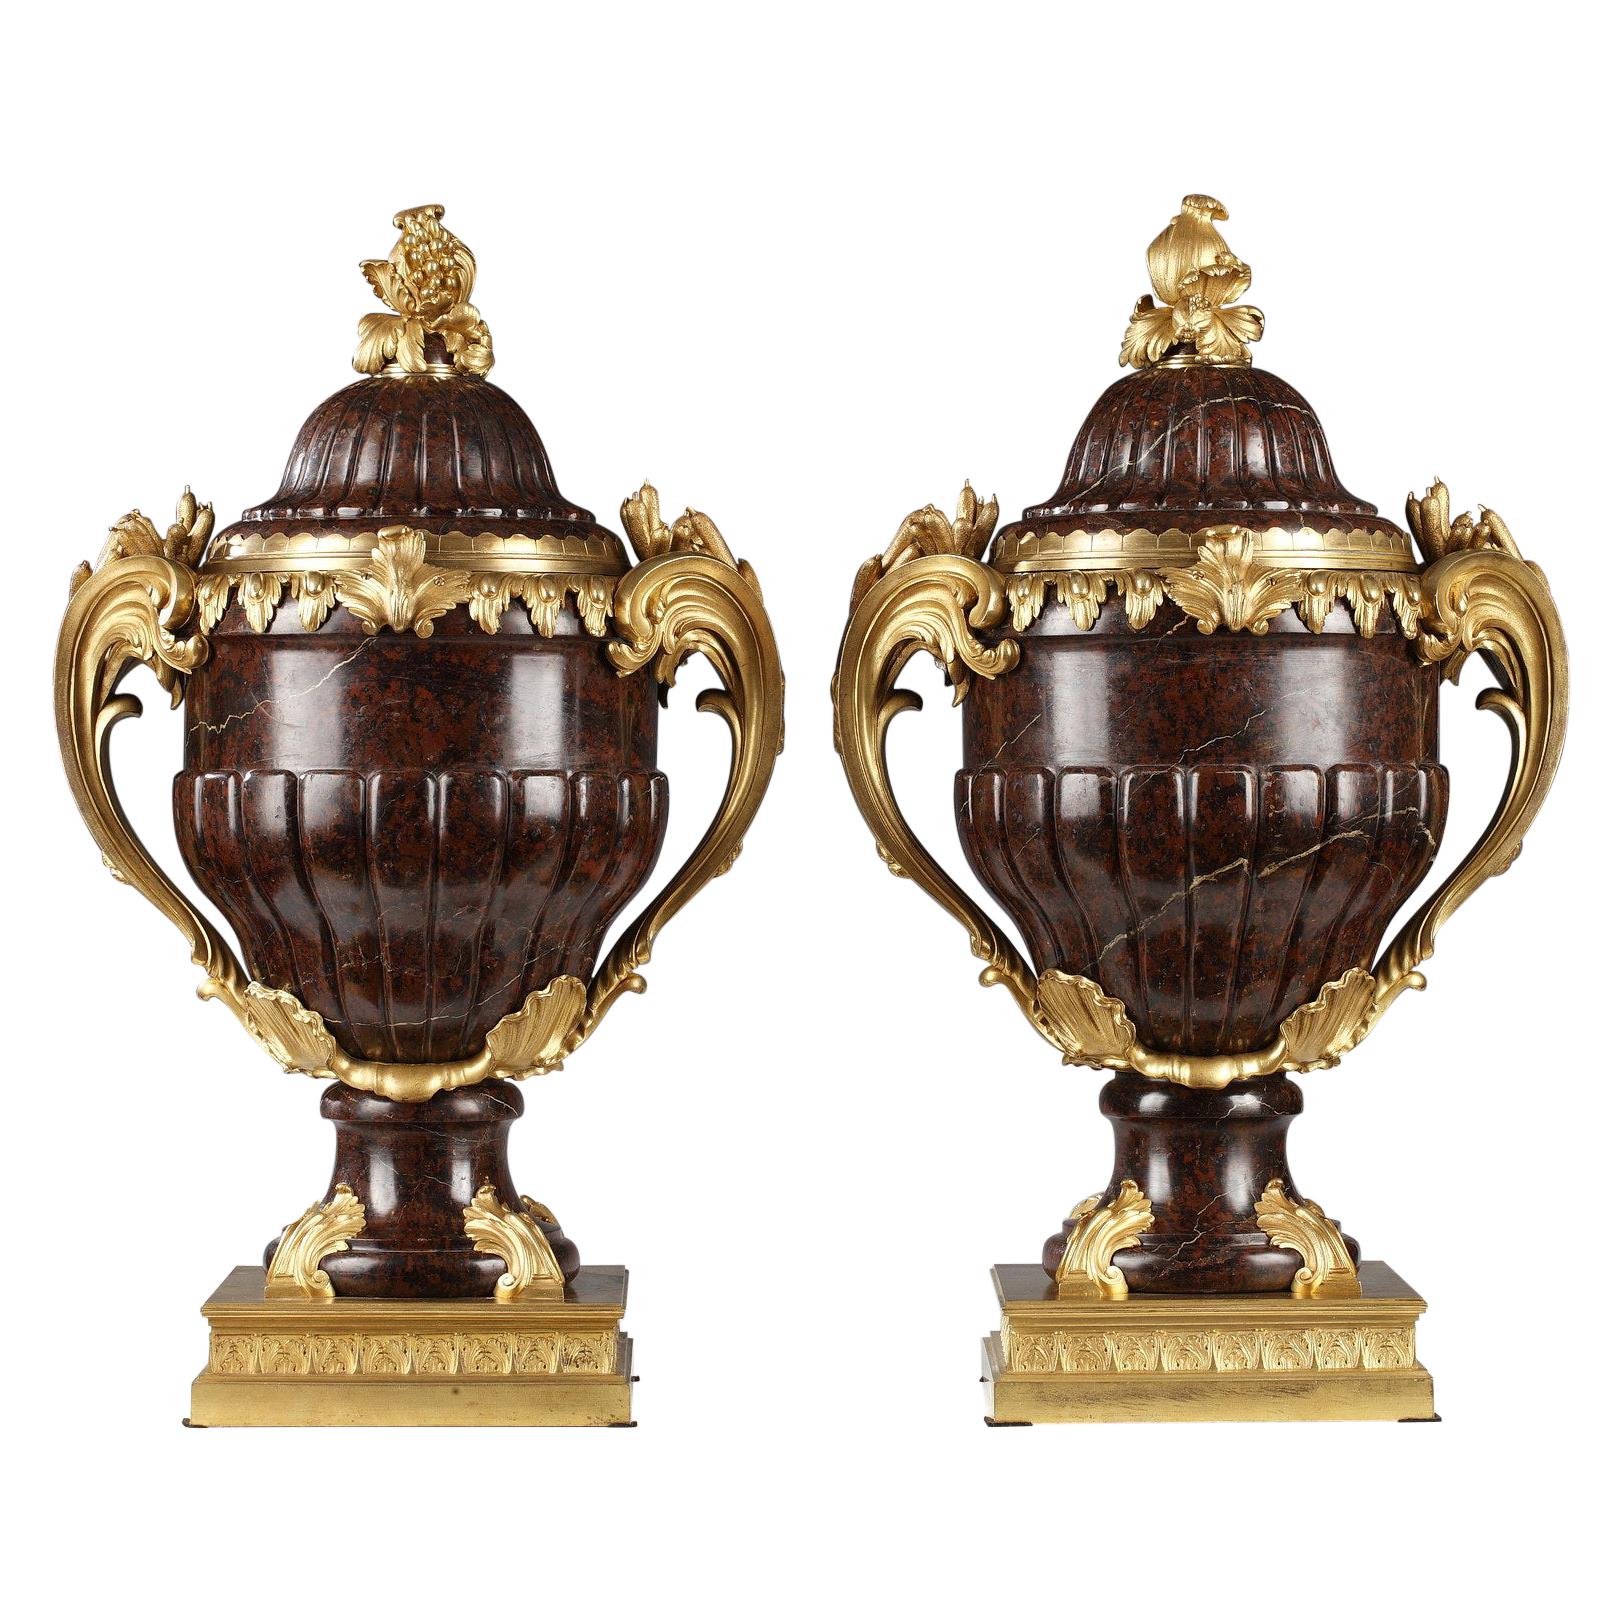 Pair of Covered Vases Attributed to Maison Lexcellent, France, Circa 1890